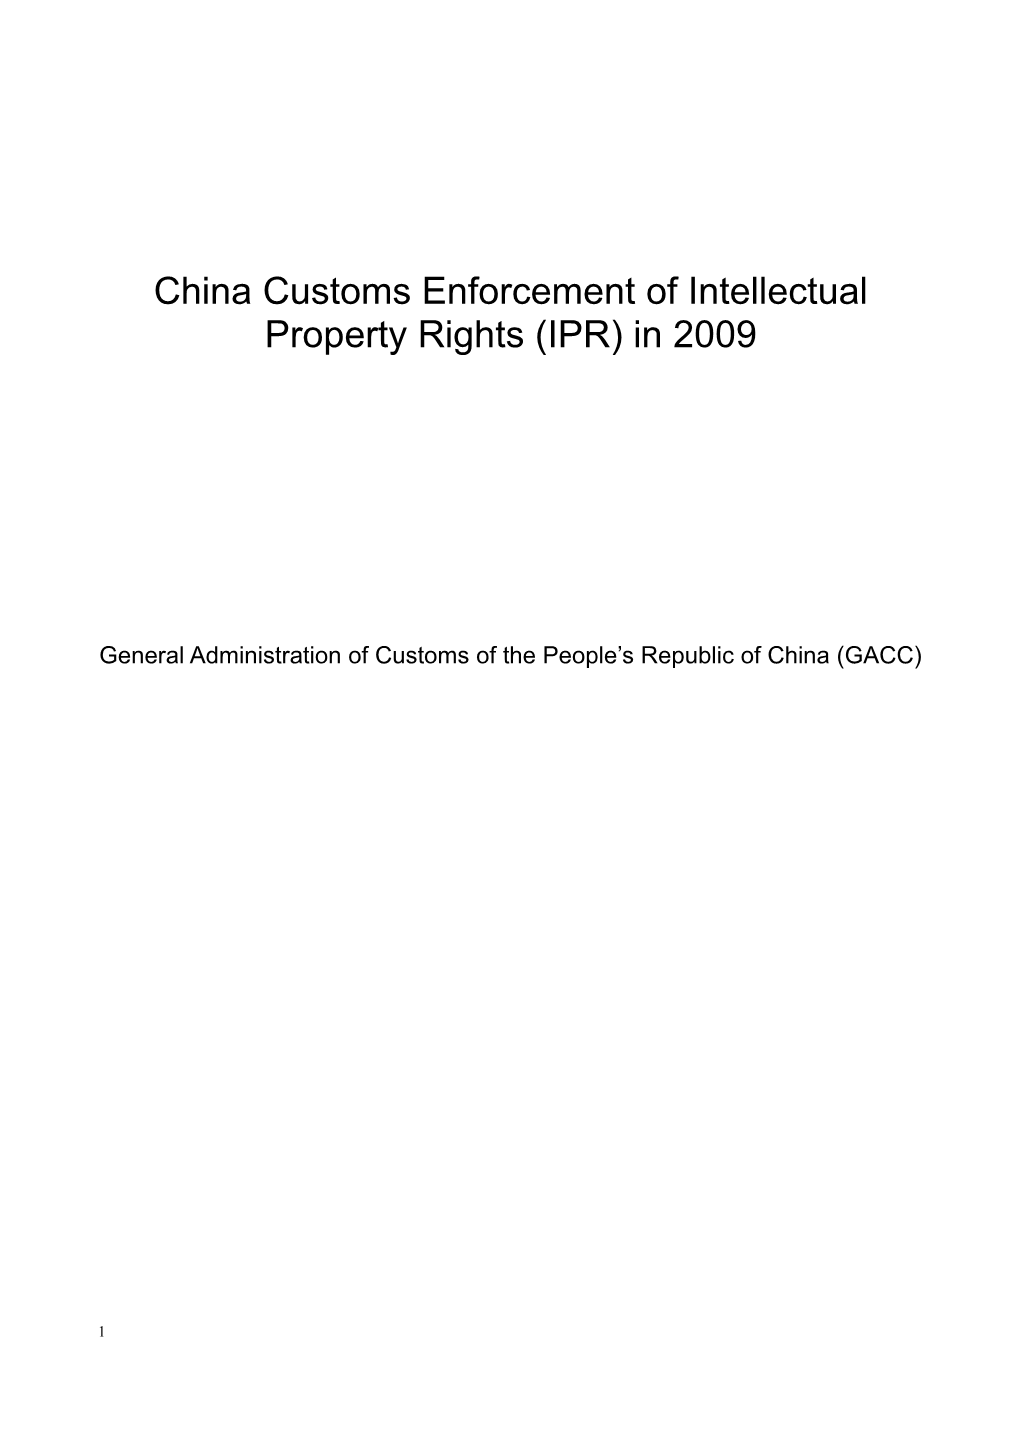 China Customs Enforcement of Intellectual Property Rights(IPR) in 2009